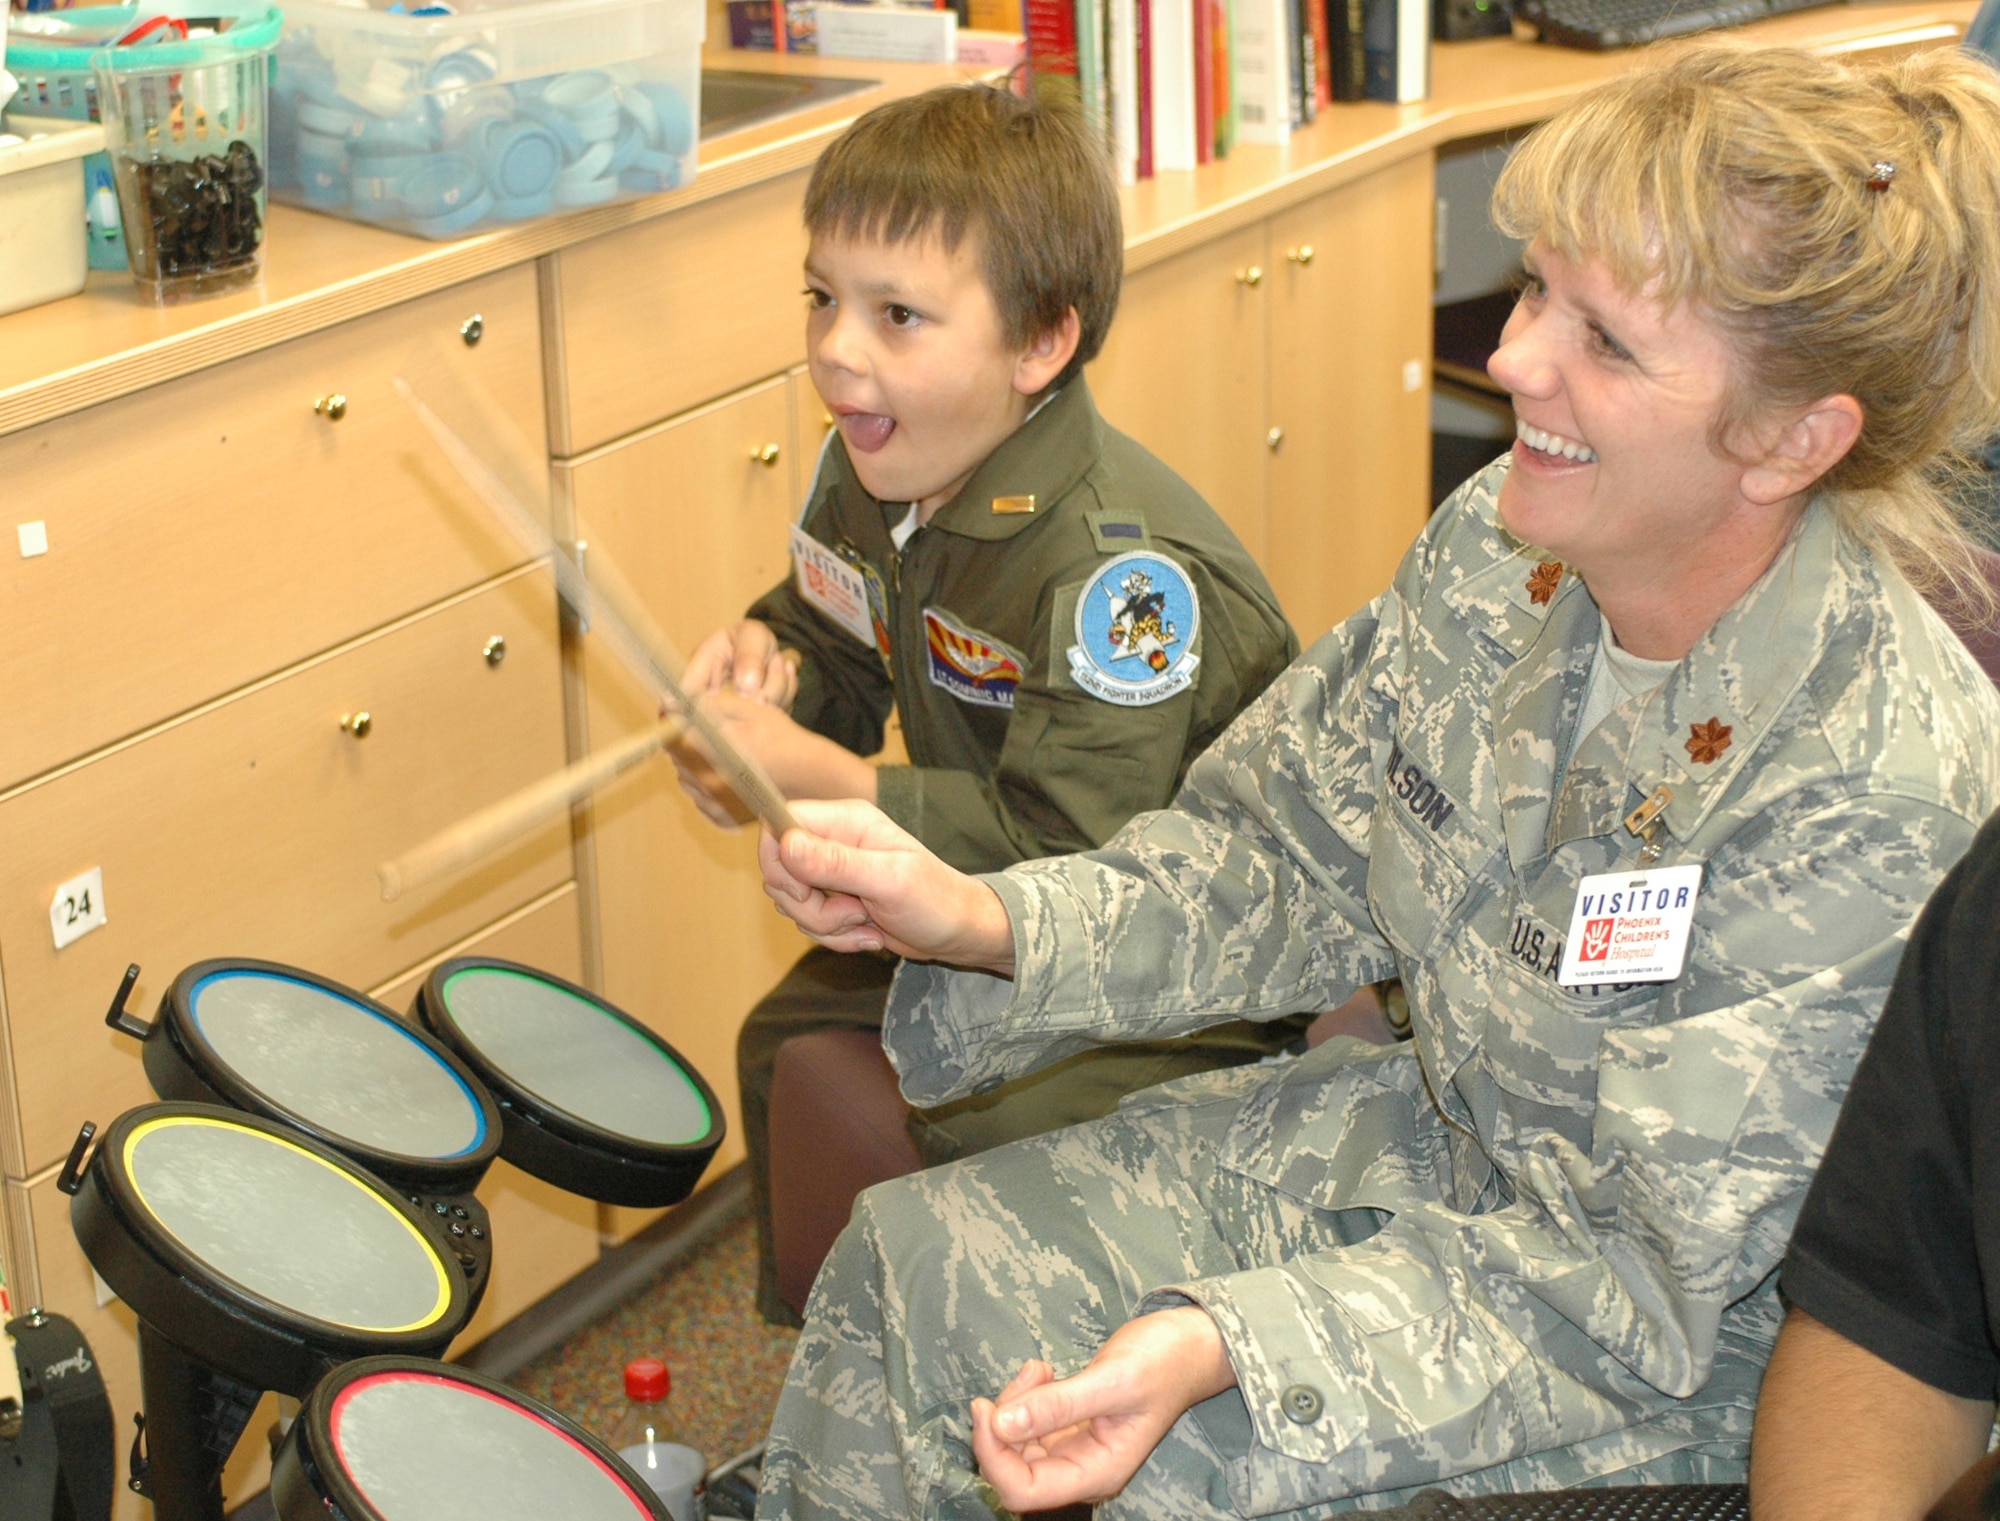 PHOENIX – Honorary 162nd Fighter Wing member Dominic Magne, 7, and Maj. Sandy Wilson play the video game “Rock Band” in a playroom at Phoenix Children’s Hospital. Wing members visited every floor and playroom in the hospital to ensure every child received a gift. The Tucson-based Guard unit held a gift drive in November and December resulting in more than 250 toys, games, books and DVDs. (Air National Guard photo by Capt. Gabe Johnson)